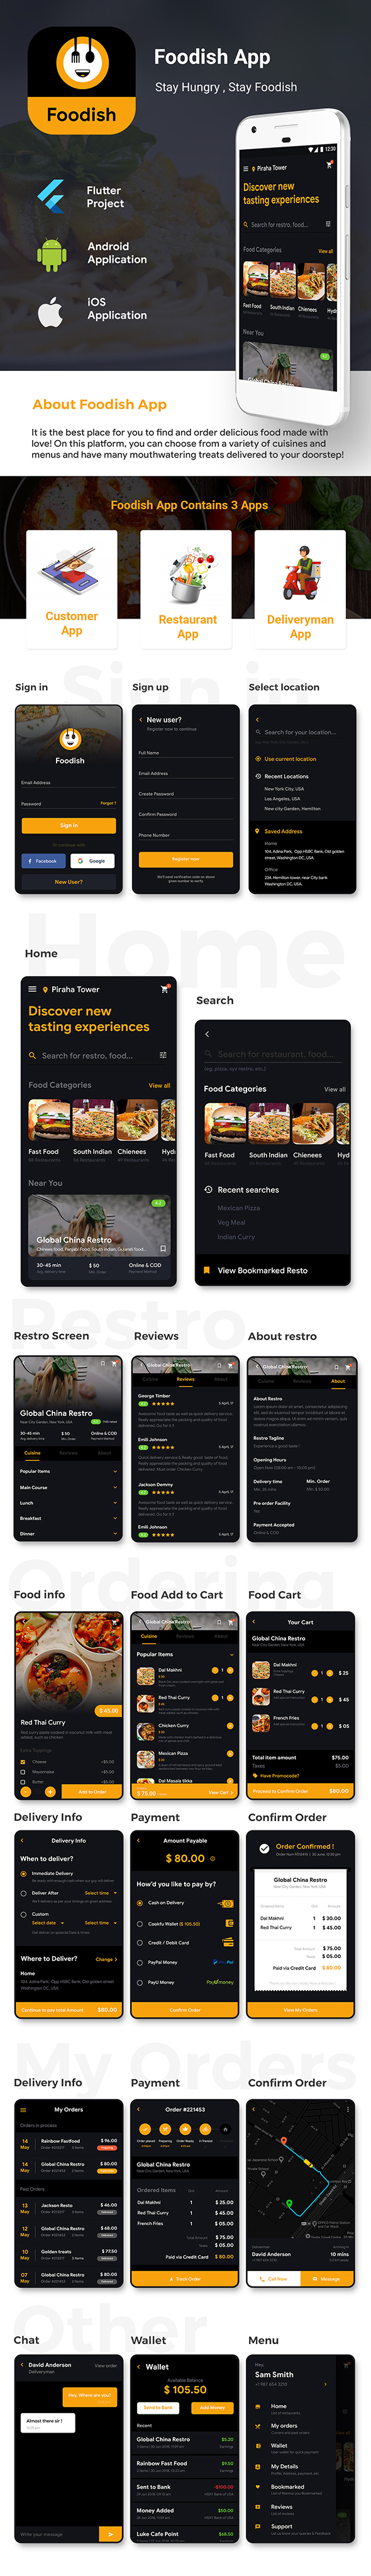 Food Ordering App | Food Delivery App | 3 Apps | Android + iOS App Template | FLUTTER 2 | Foodish - 4